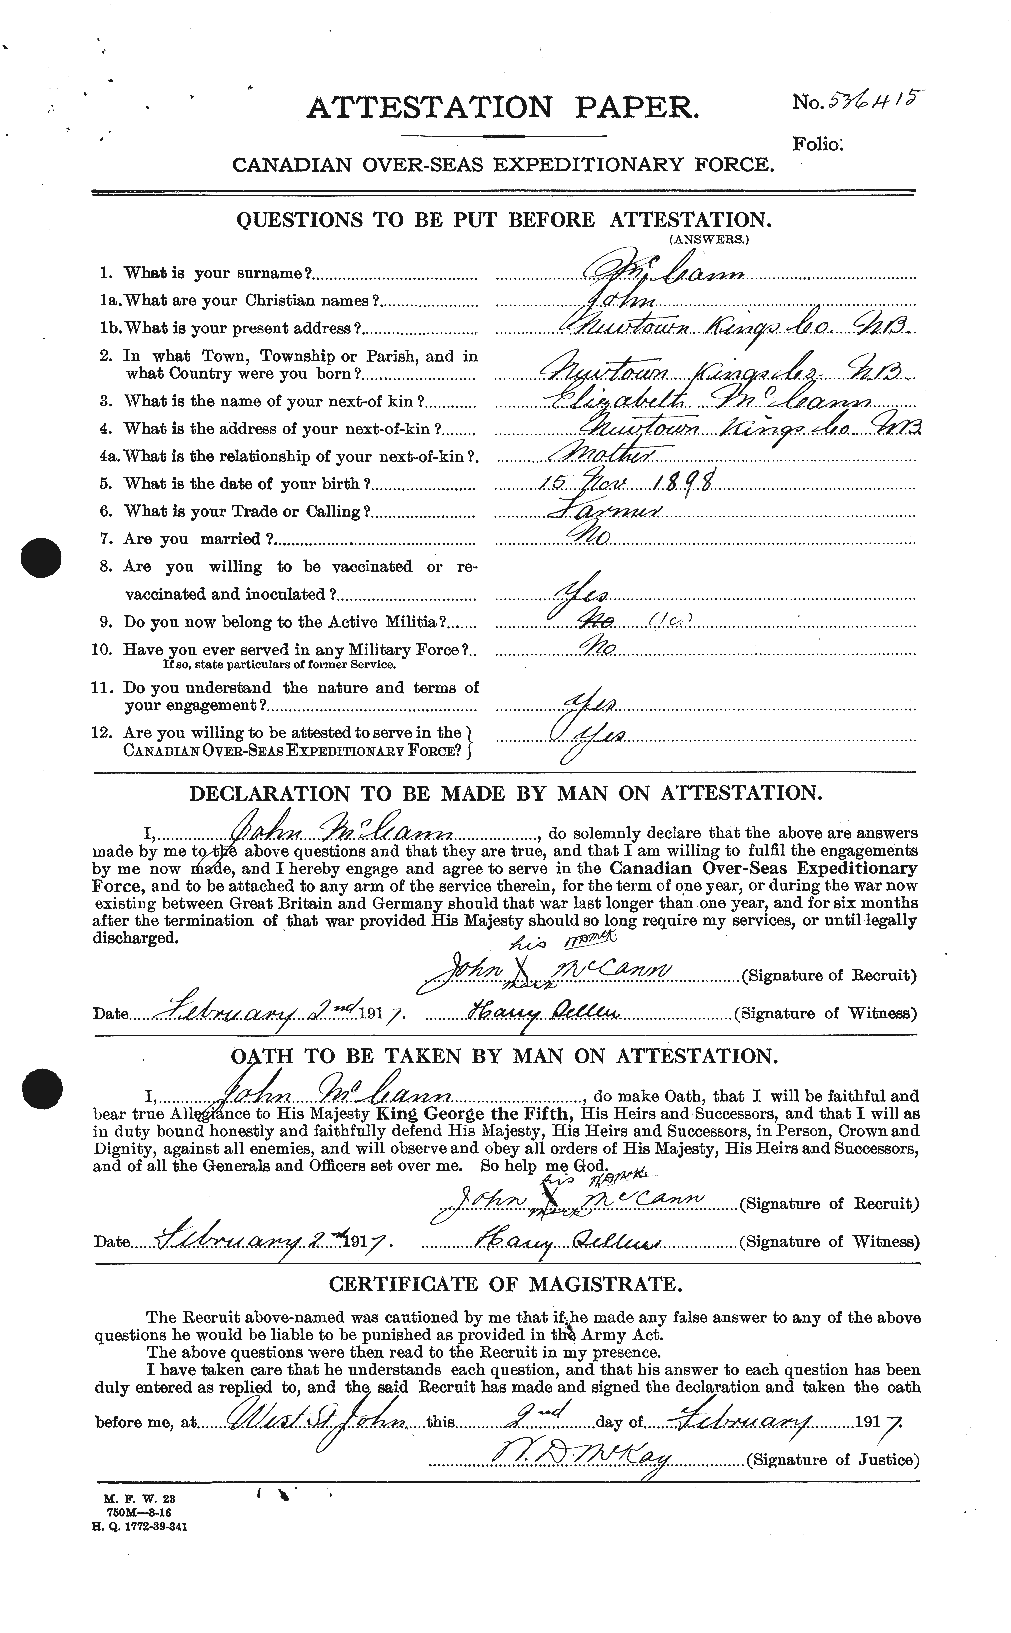 Personnel Records of the First World War - CEF 132726a